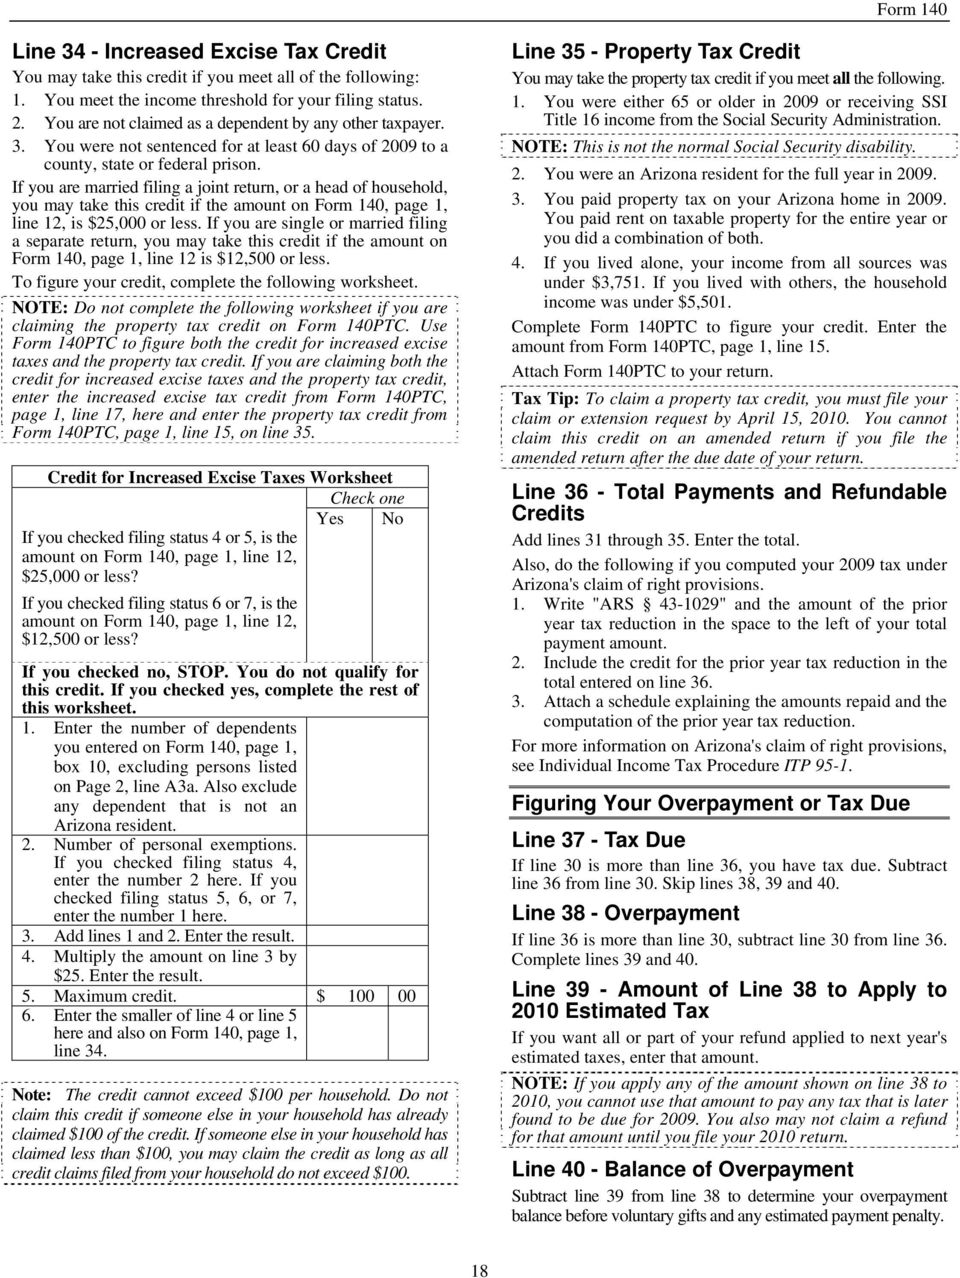 If you are married filing a joint return, or a head of household, you may take this credit if the amount on Form 140, page 1, line 12, is $25,000 or less.